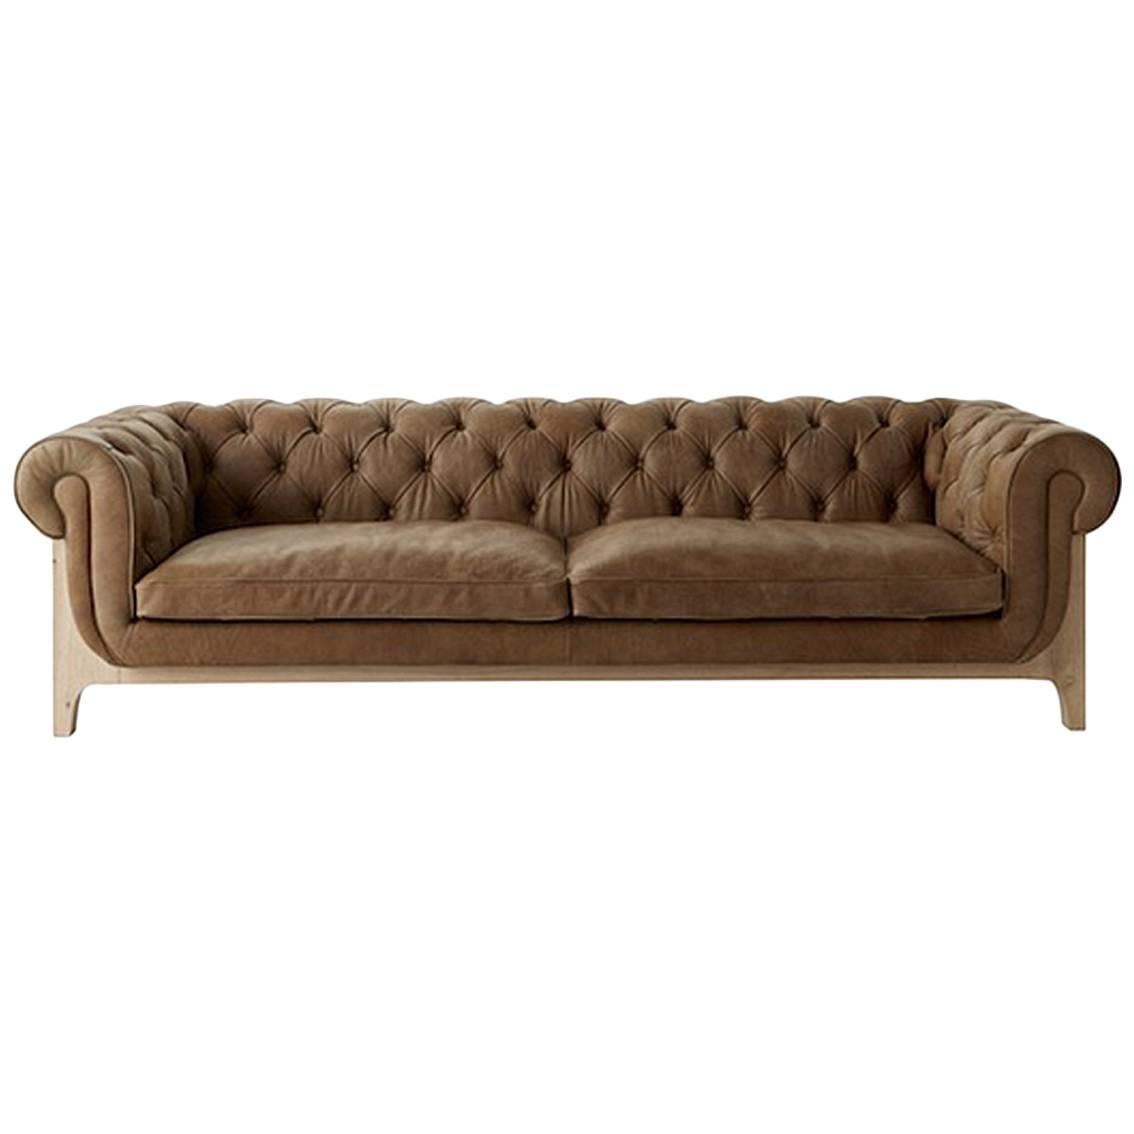 Chesterfield Sofa Genuine Leather 3 Seater with Solid Oak Structure